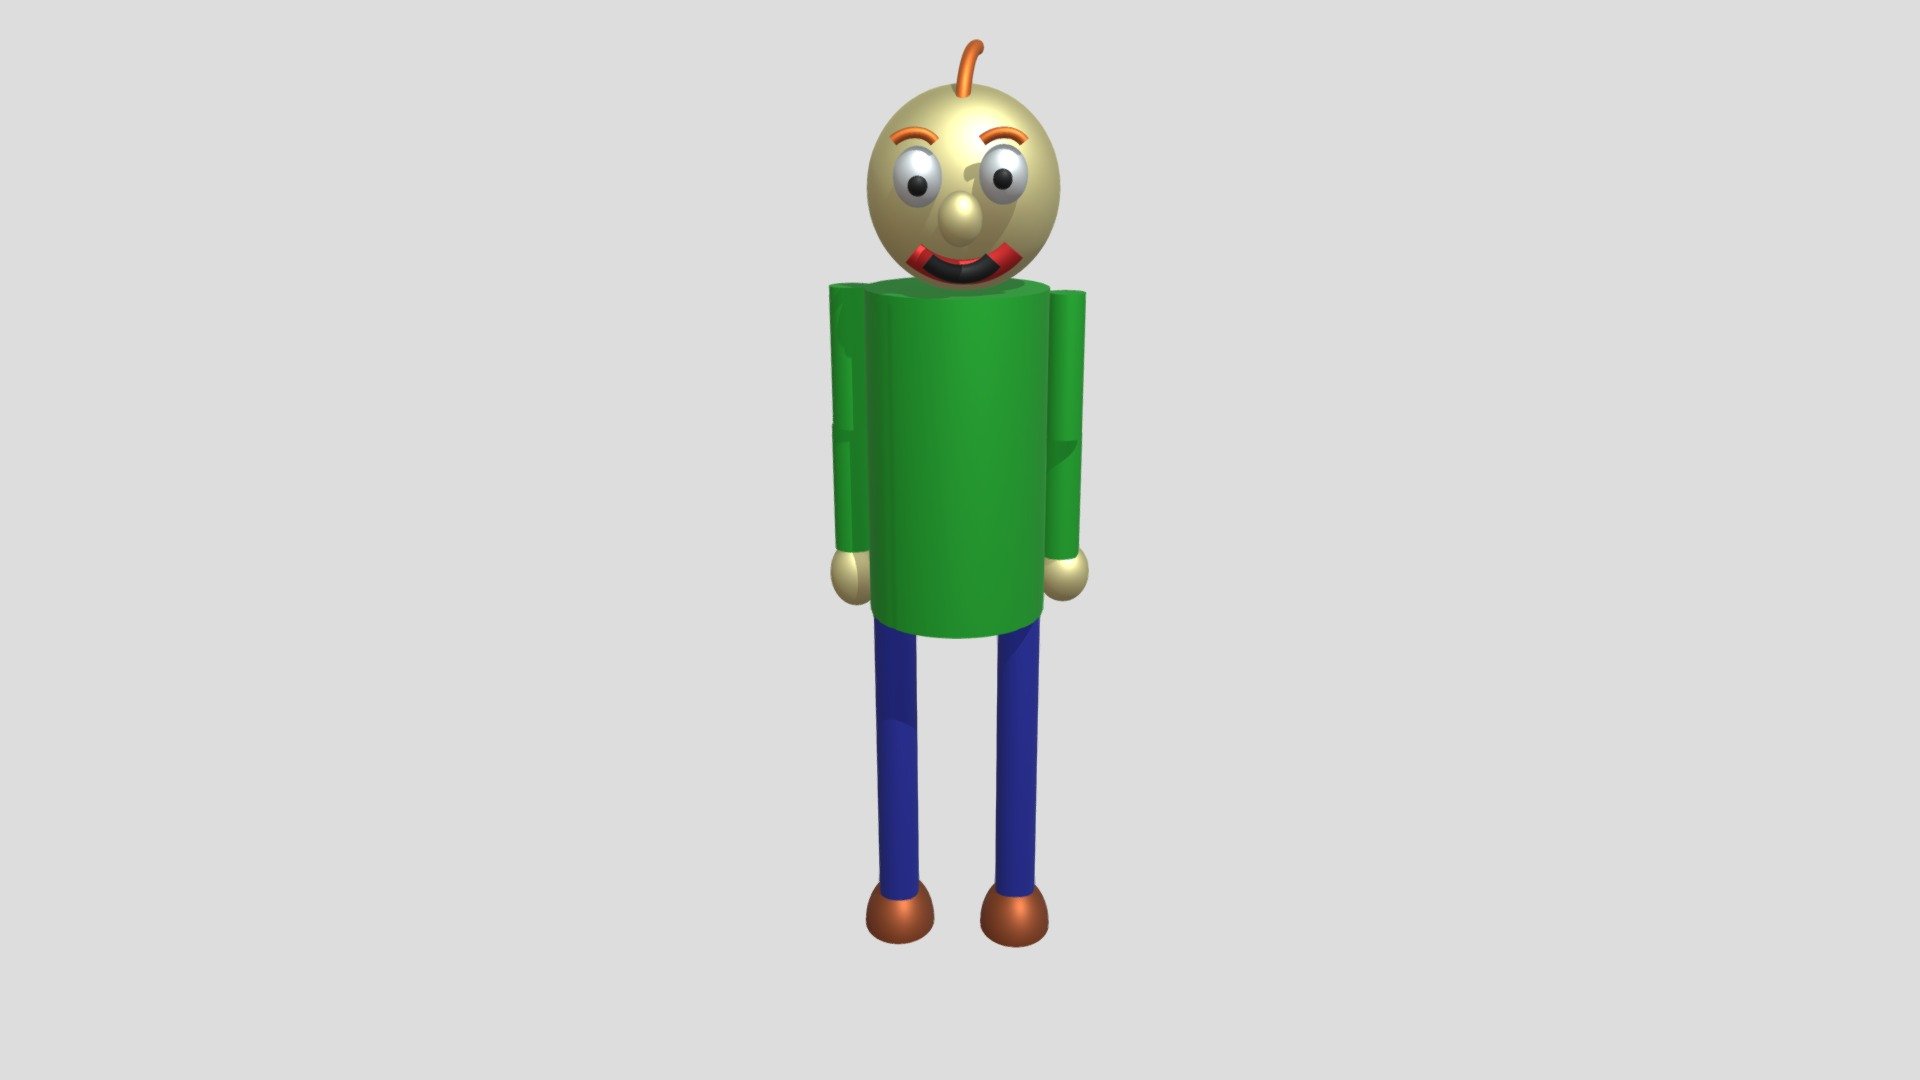 Download Baldi In HD MOD APK v1.9.82 (Unlimited Energy) For Android